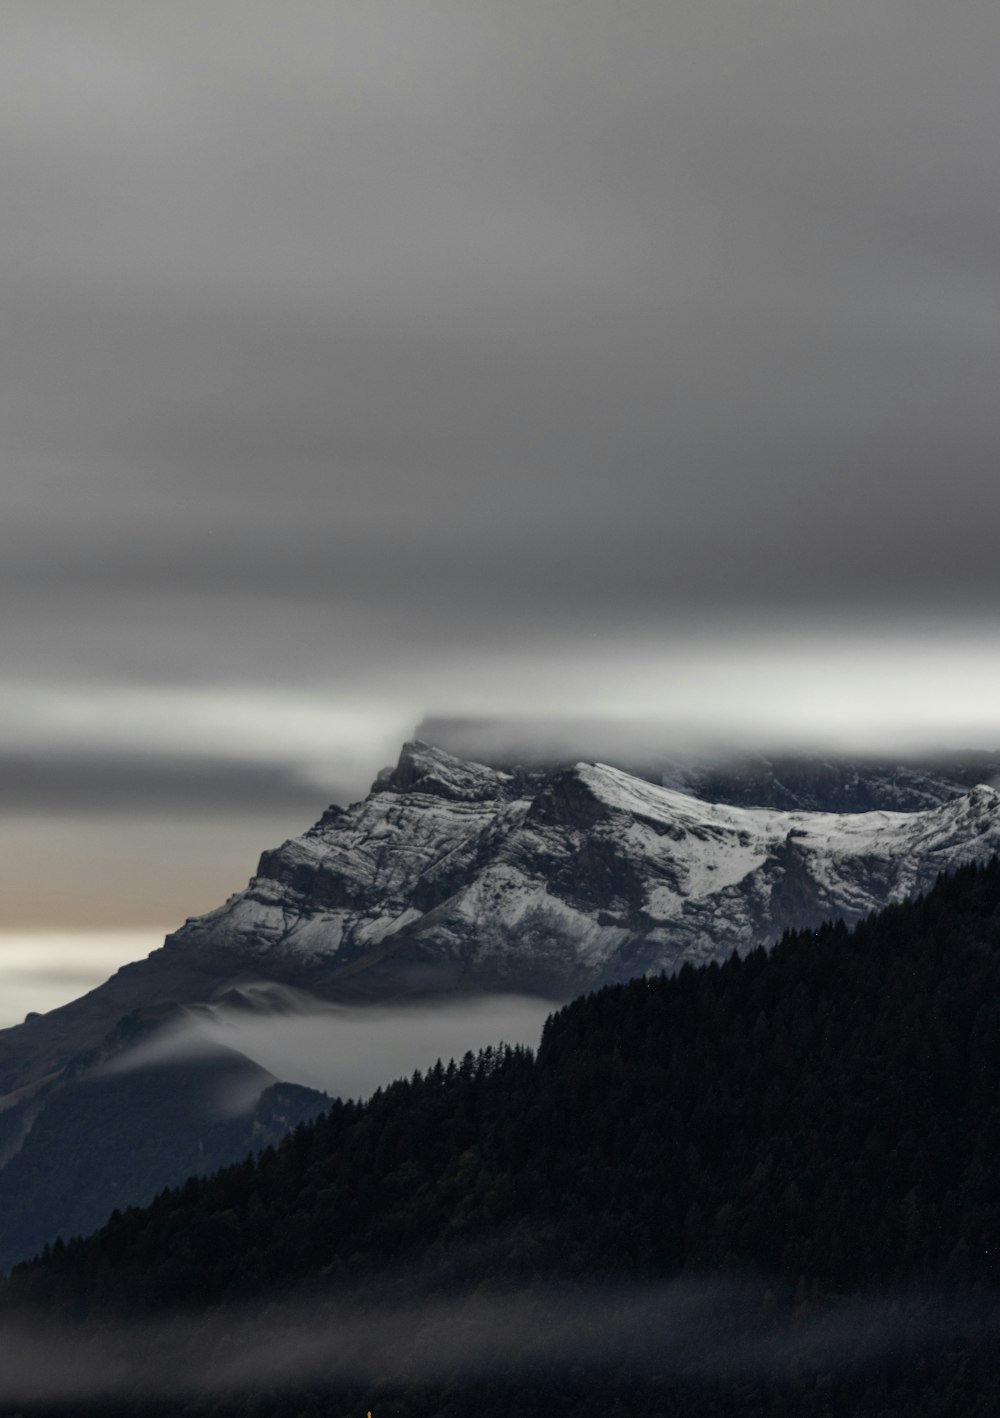 a mountain covered in snow and clouds under a cloudy sky